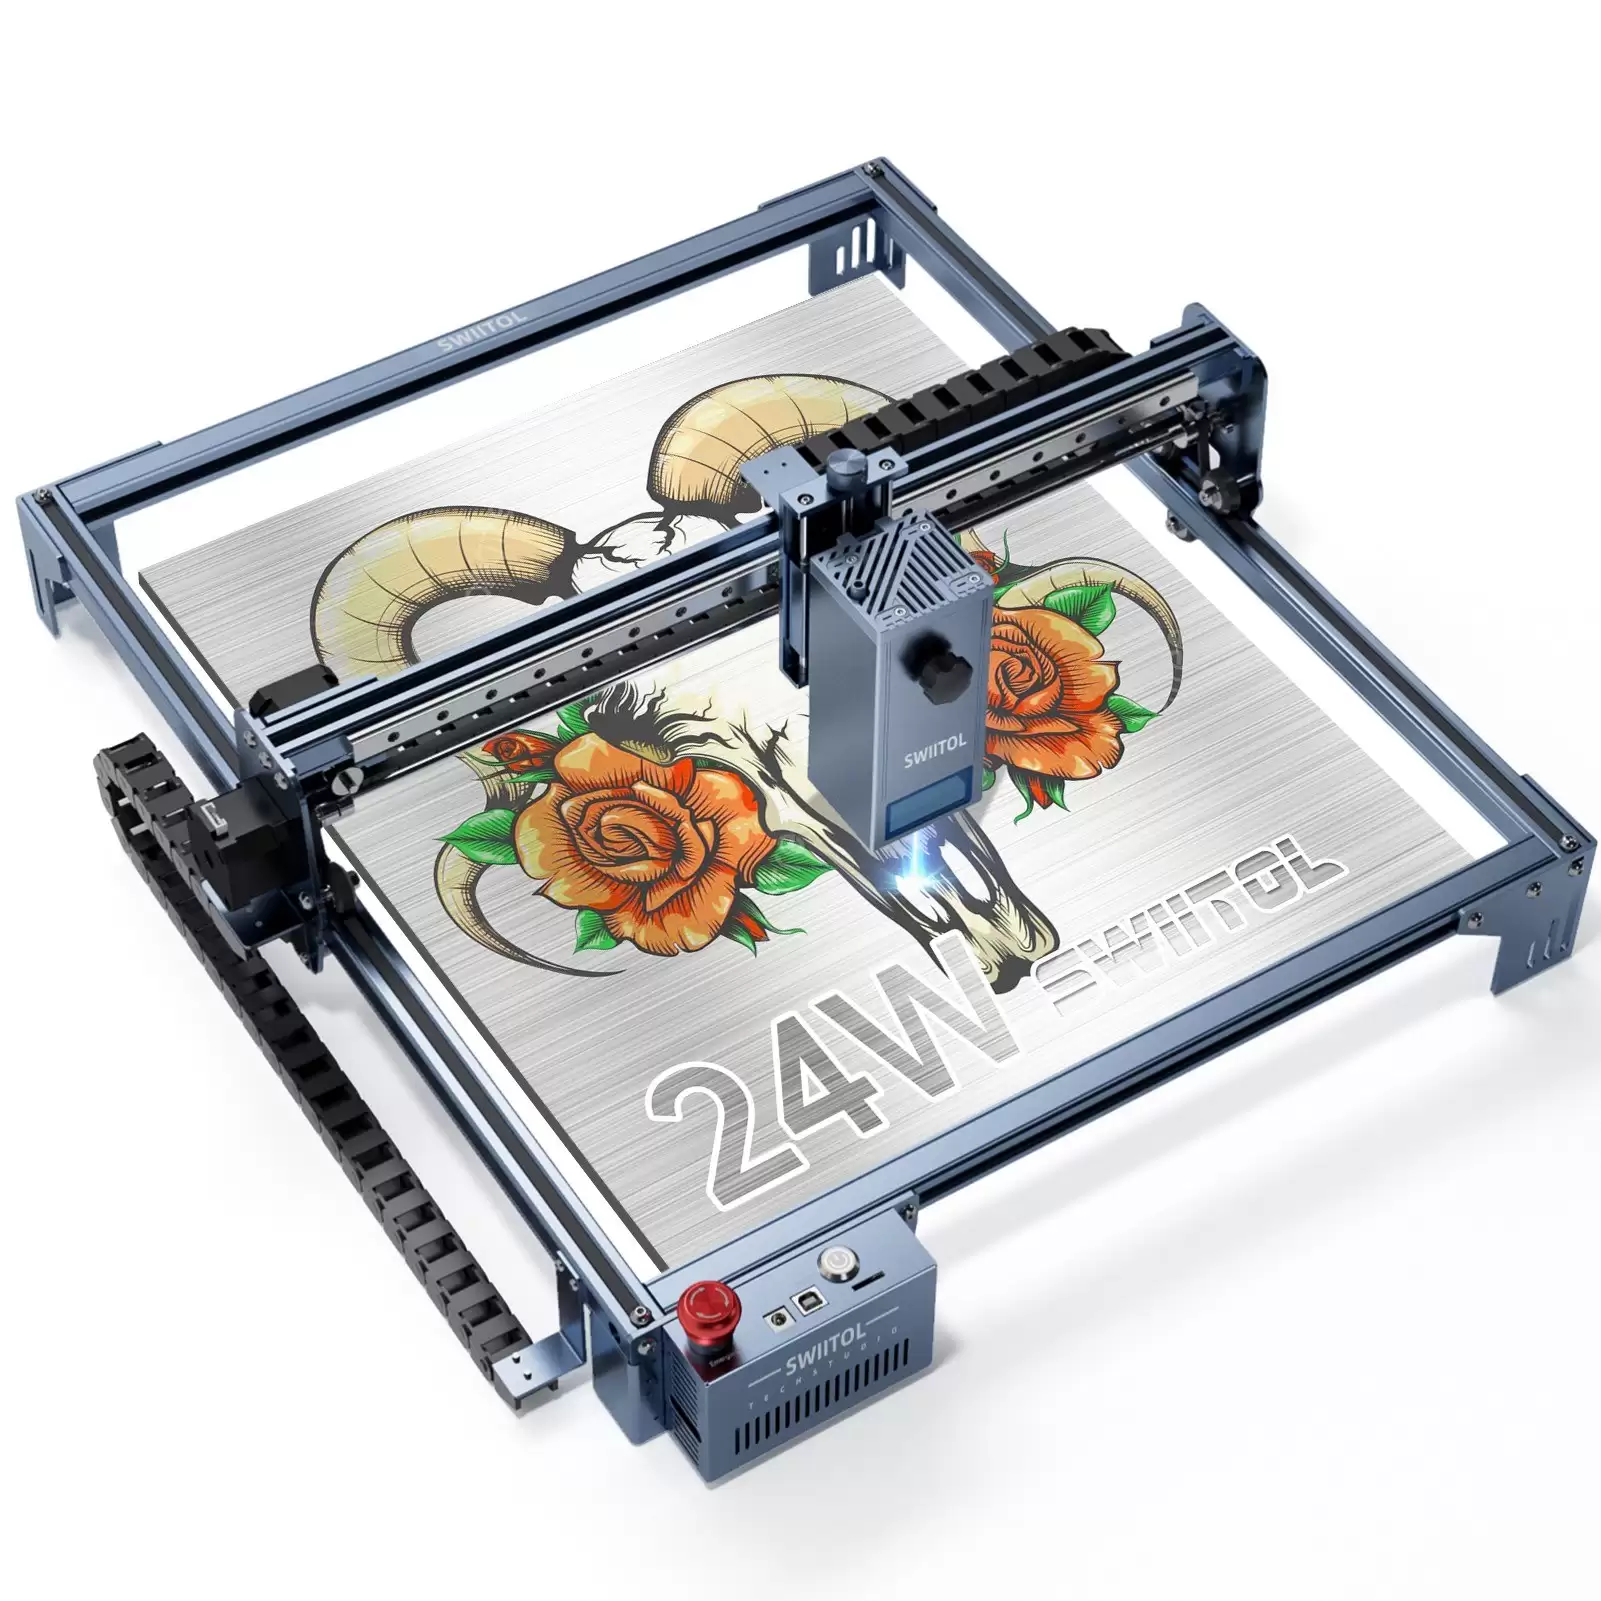 Order In Just €369 Swiitol C24 Pro 24w Laser Engraver With This Discount Coupon At Tomtop